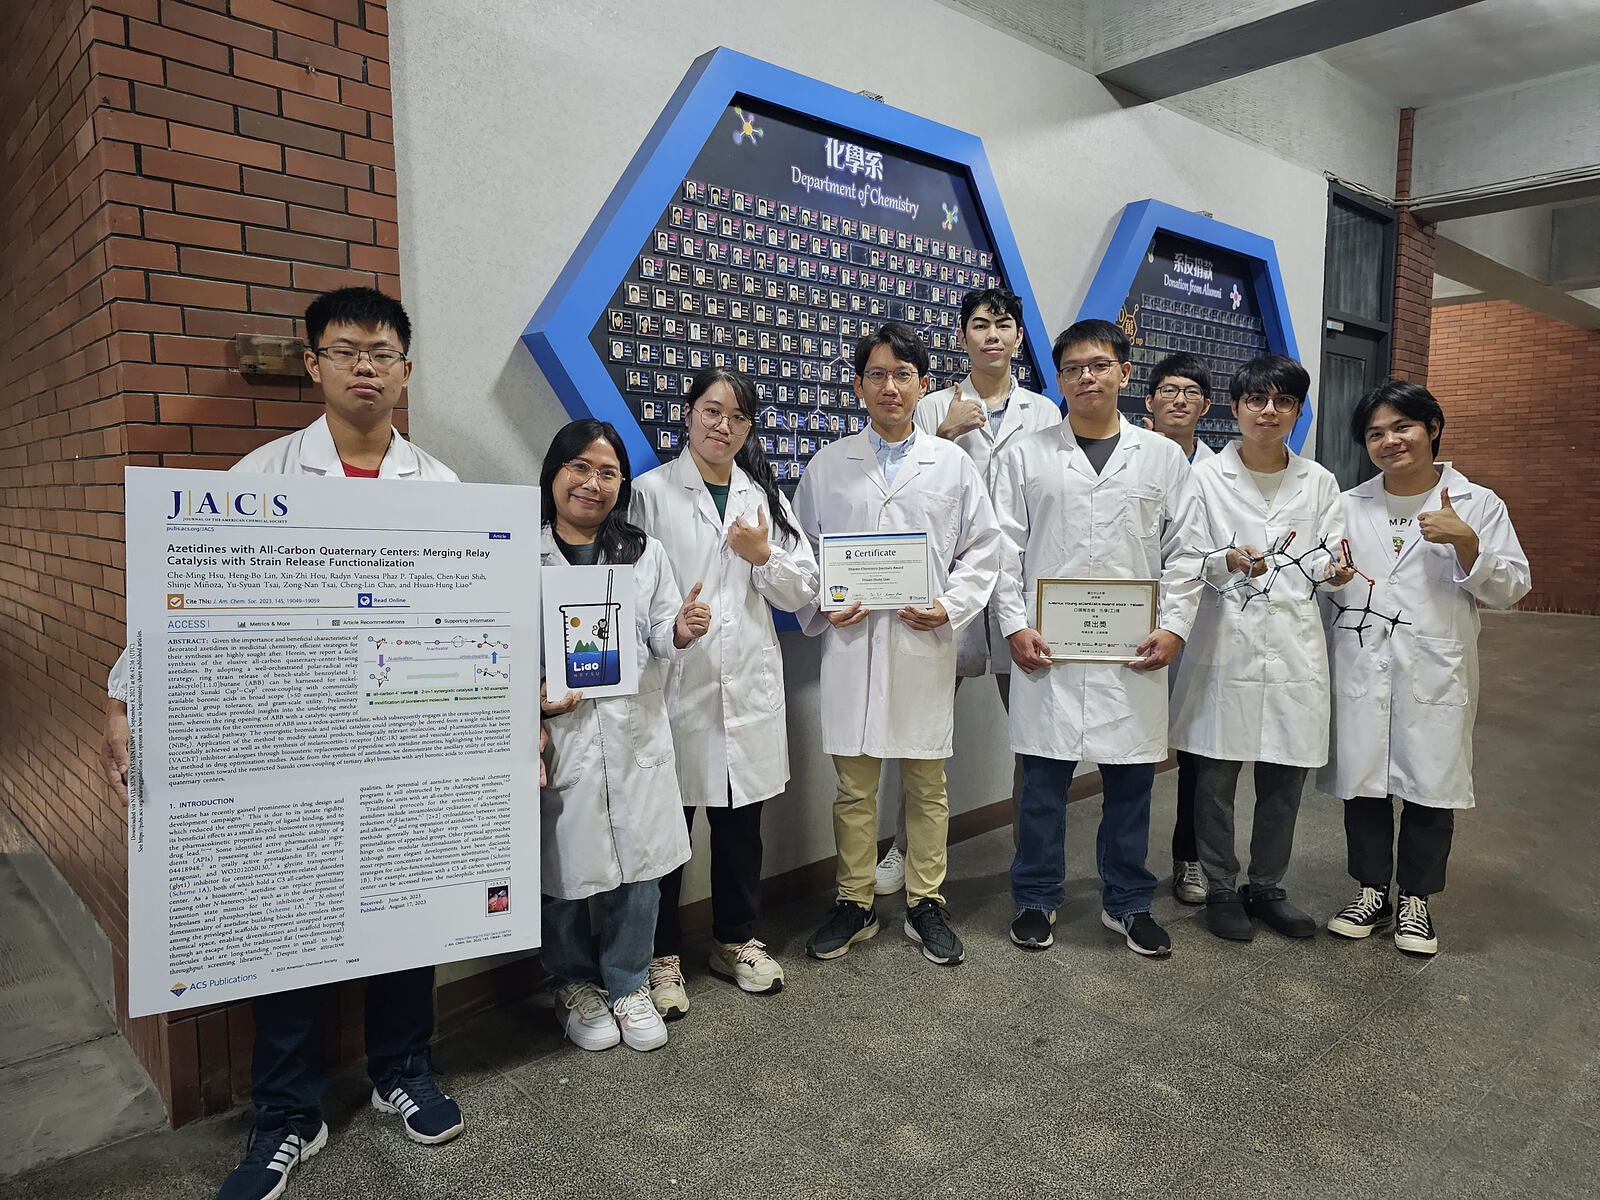 After four years of in-depth research, the group of Hsuan-Hung Liao (fourth from the left), an associate professor in the Department of Chemistry at National Sun Yat-sen University (NSYSU) and a recipient of the Yushan Young Fellow Program, pioneered the world's first polar-radical relay catalysis strategy, which not only successfully prepared the key molecular structure "Azetidine," but also successfully applied it to the synthesis of small molecule drugs, and developed two new drug candidates. This innovative research result was published in the Journal of the American Chemical Society (JACS), an internationally renowned chemistry journal.